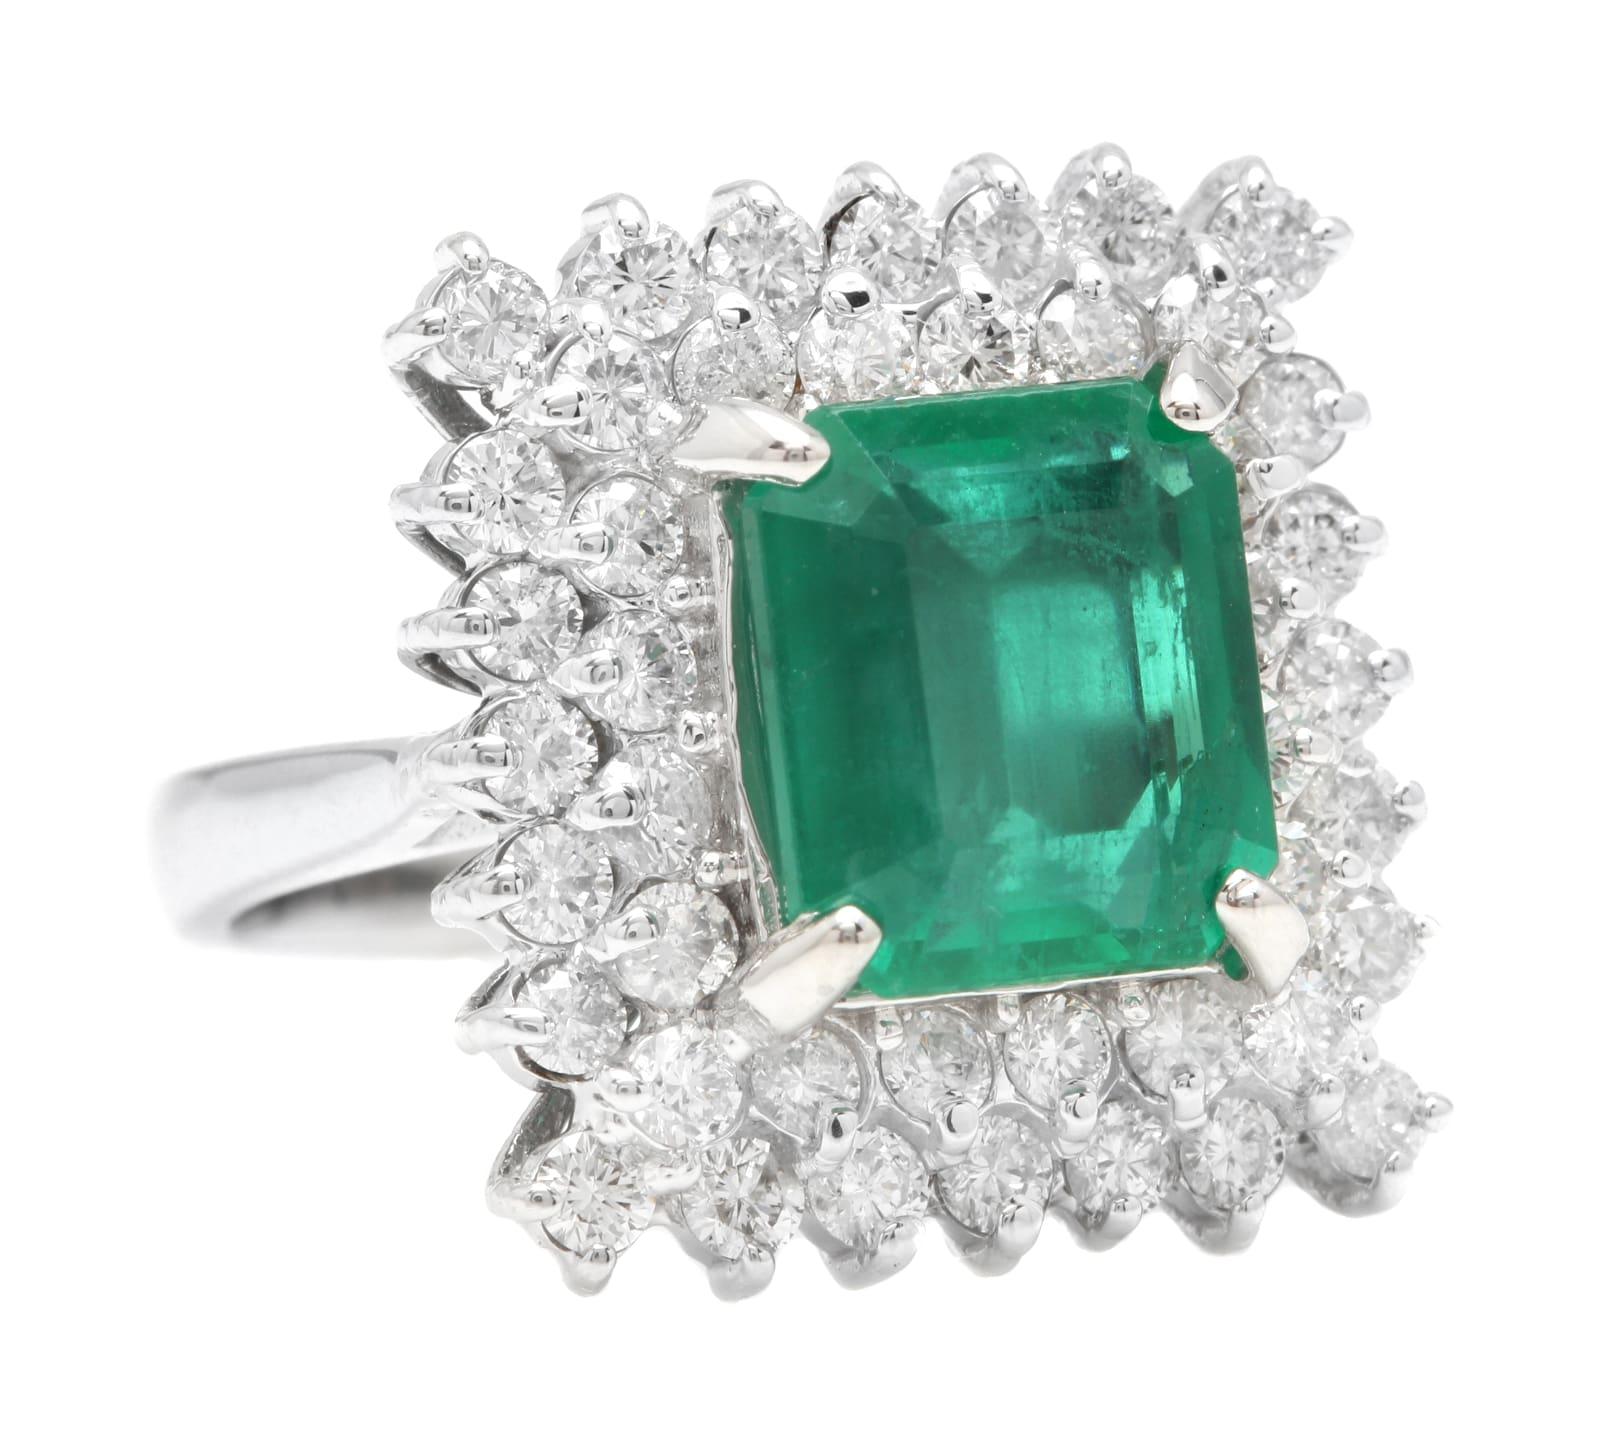 4.80 Carats Natural Emerald and Diamond 14K Solid White Gold Ring

Suggested Replacement Value: Approx. $8,000.00

Total Natural Green Emerald Weight is: Approx. 3.30 Carats (transparent)

Emerald Measures: Approx. 11 x 10mm

Emerald Treatment: